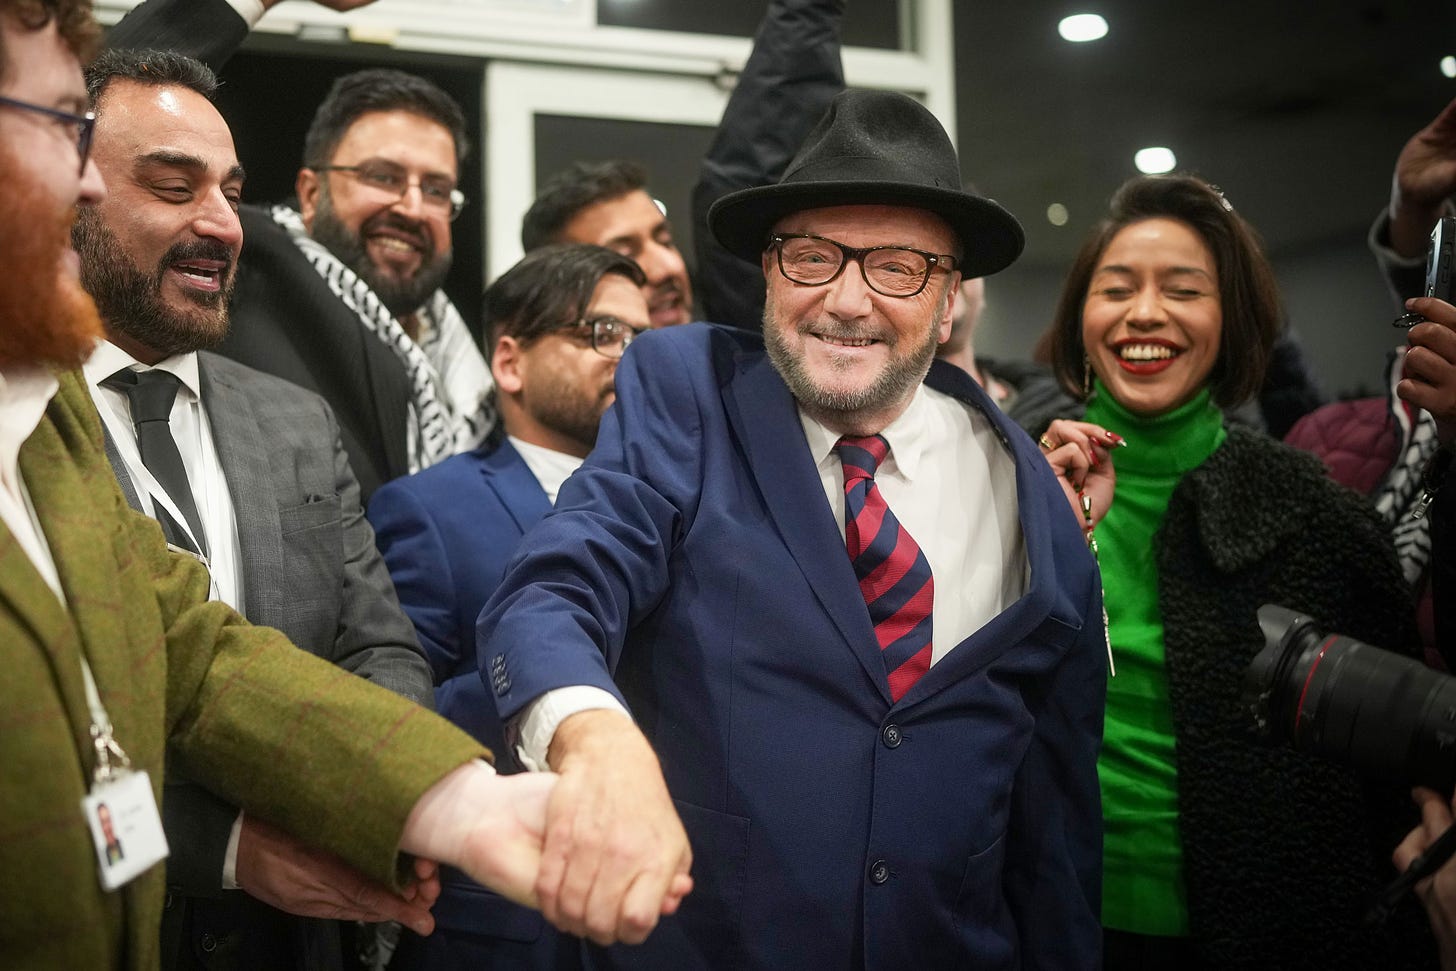 Rochdale By-Election: George Galloway Wins After Campaign Dominated by Gaza  War - Bloomberg